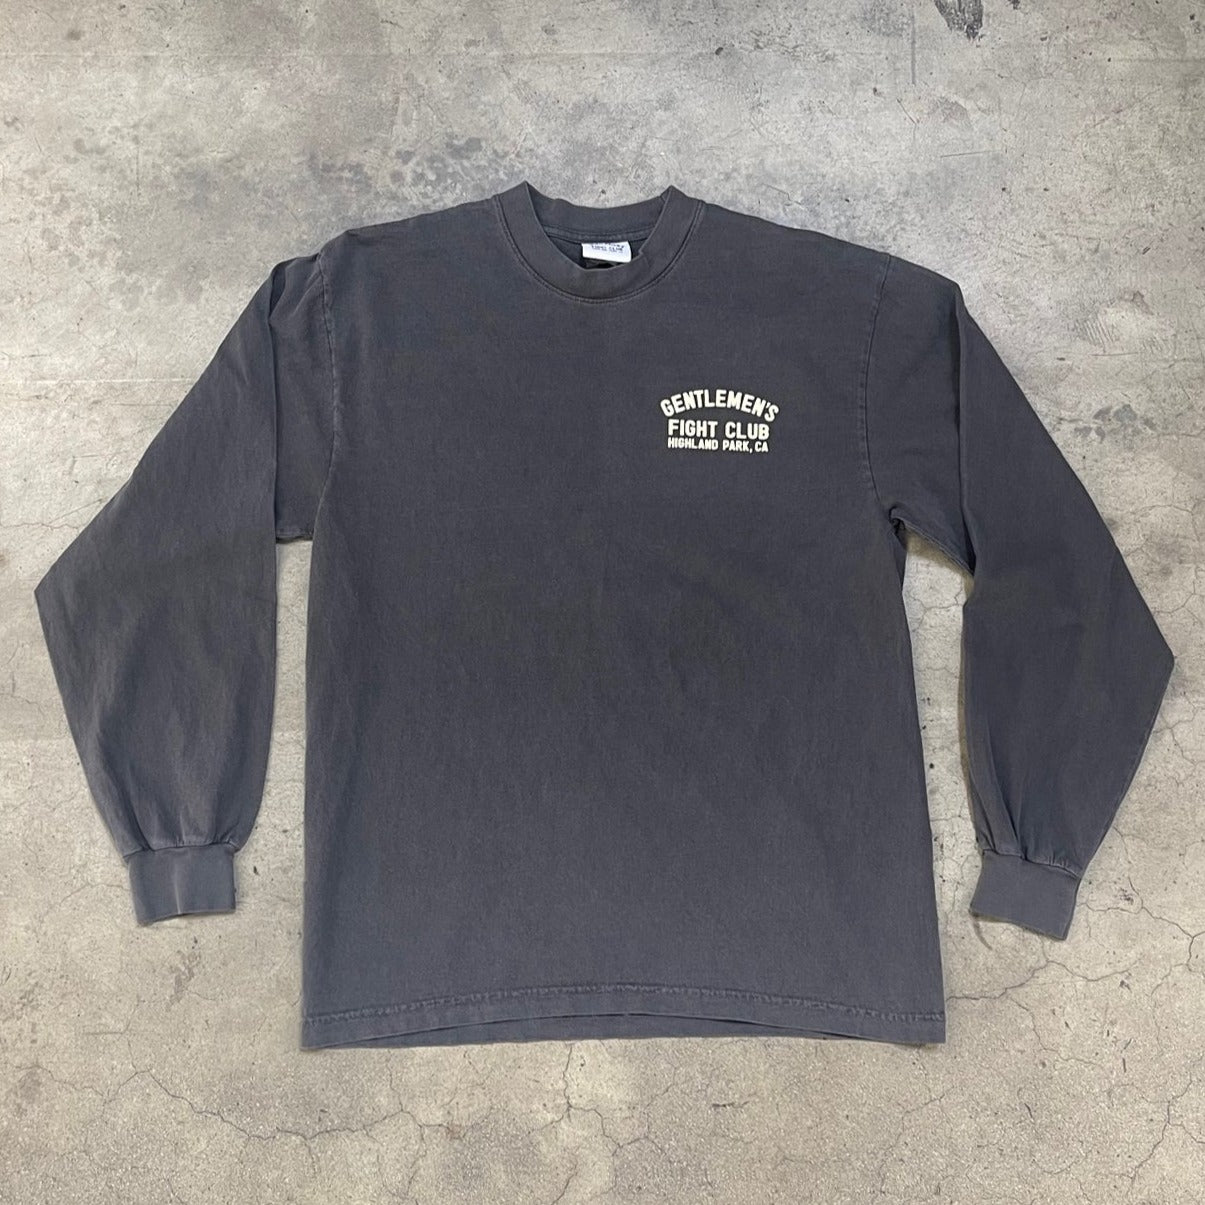 Front of long sleeve faded black shirt. Cream colored graphic print reads "Gentlemen's Fight Club Highland Park, CA"